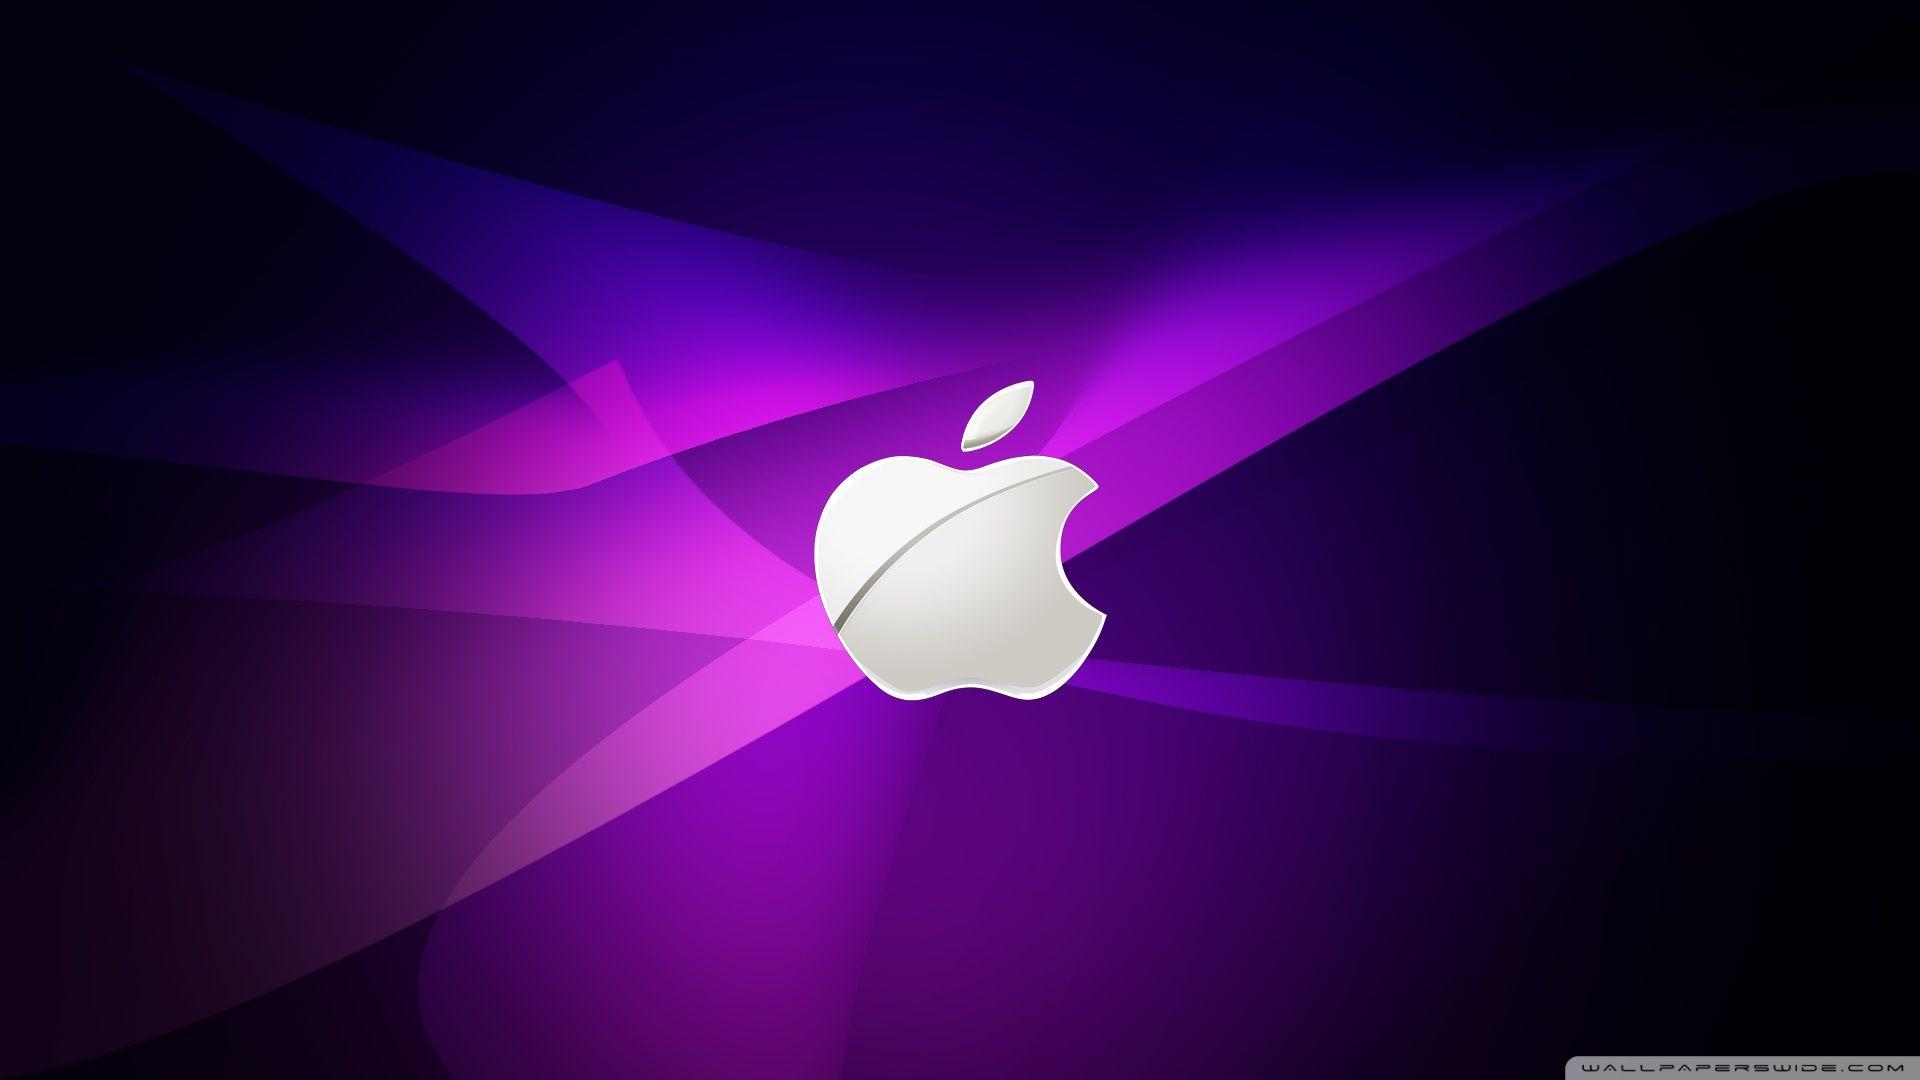 Full HD Apple Wallpapers - Top Free Full HD Apple Backgrounds ...